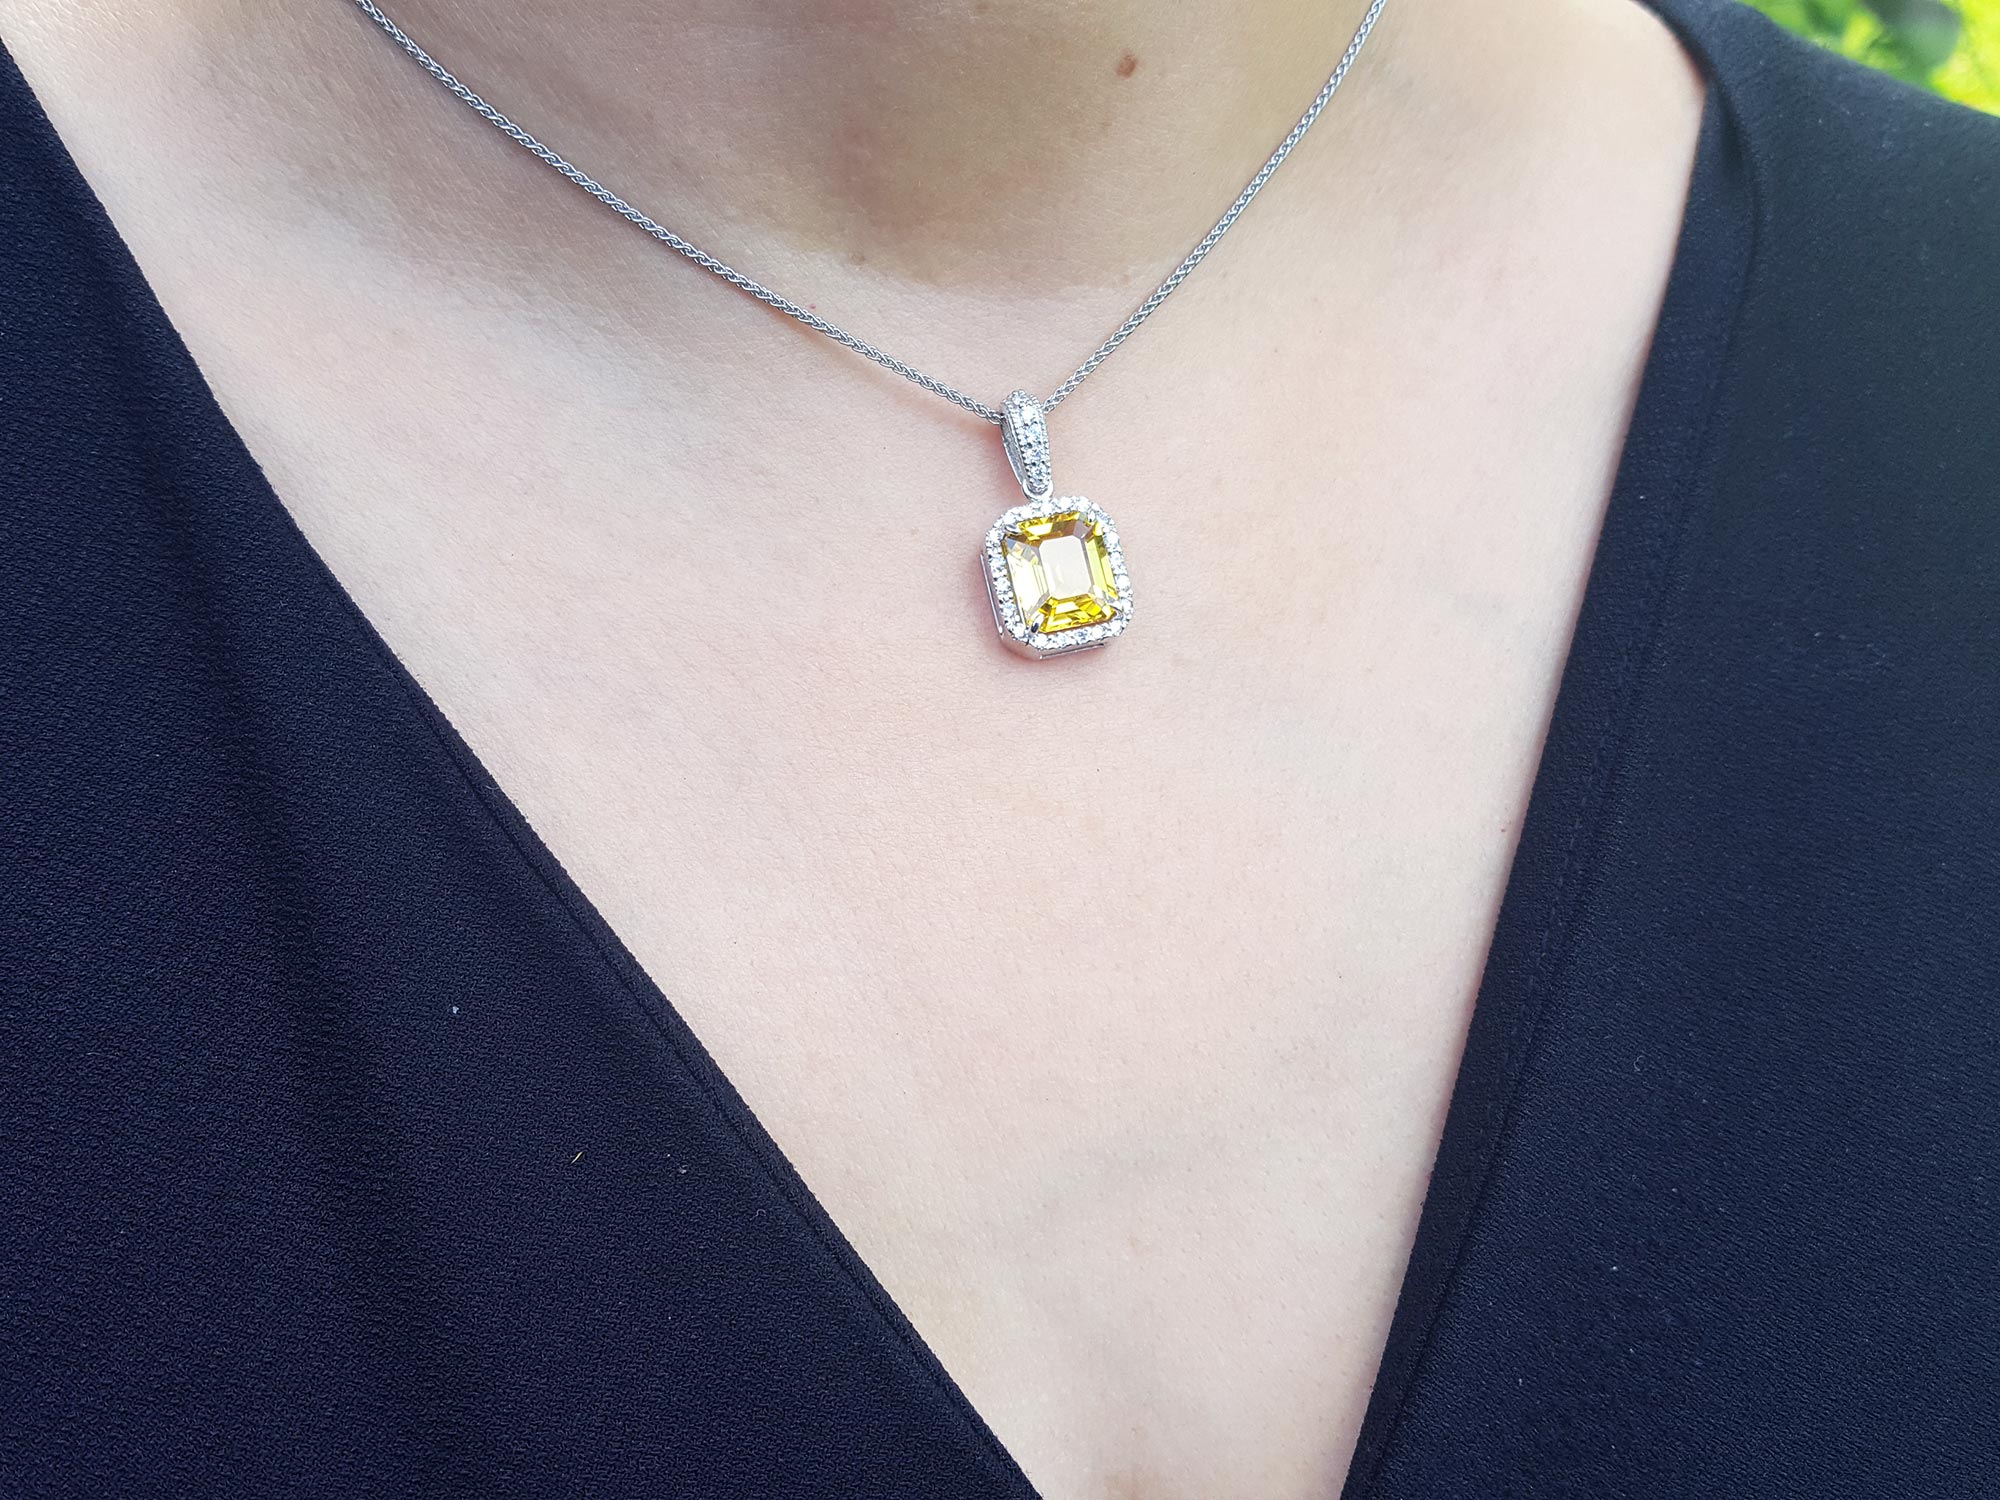 High quality yellow sapphire necklace